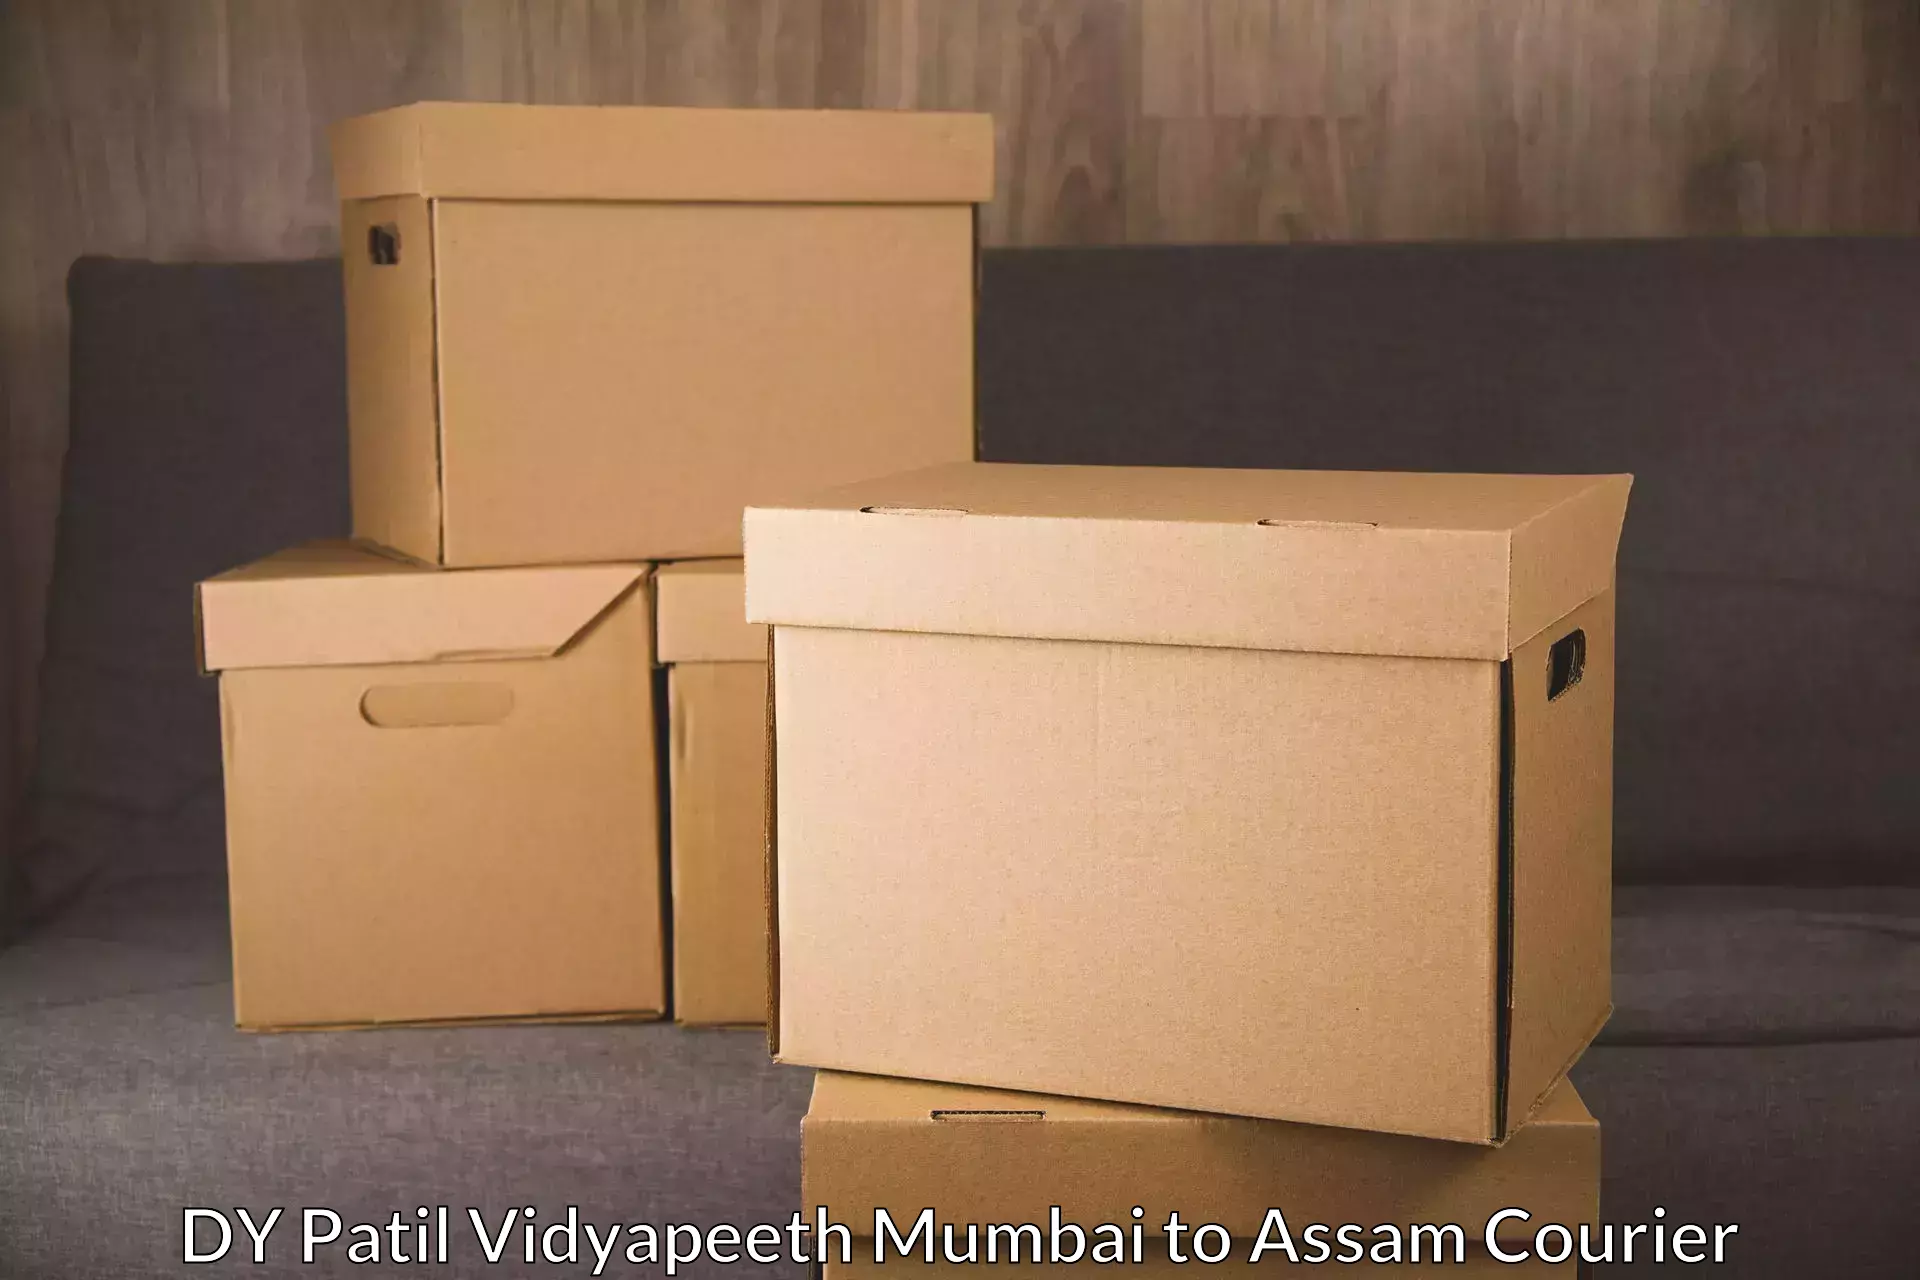 Courier service comparison in DY Patil Vidyapeeth Mumbai to Mirza Kamrup